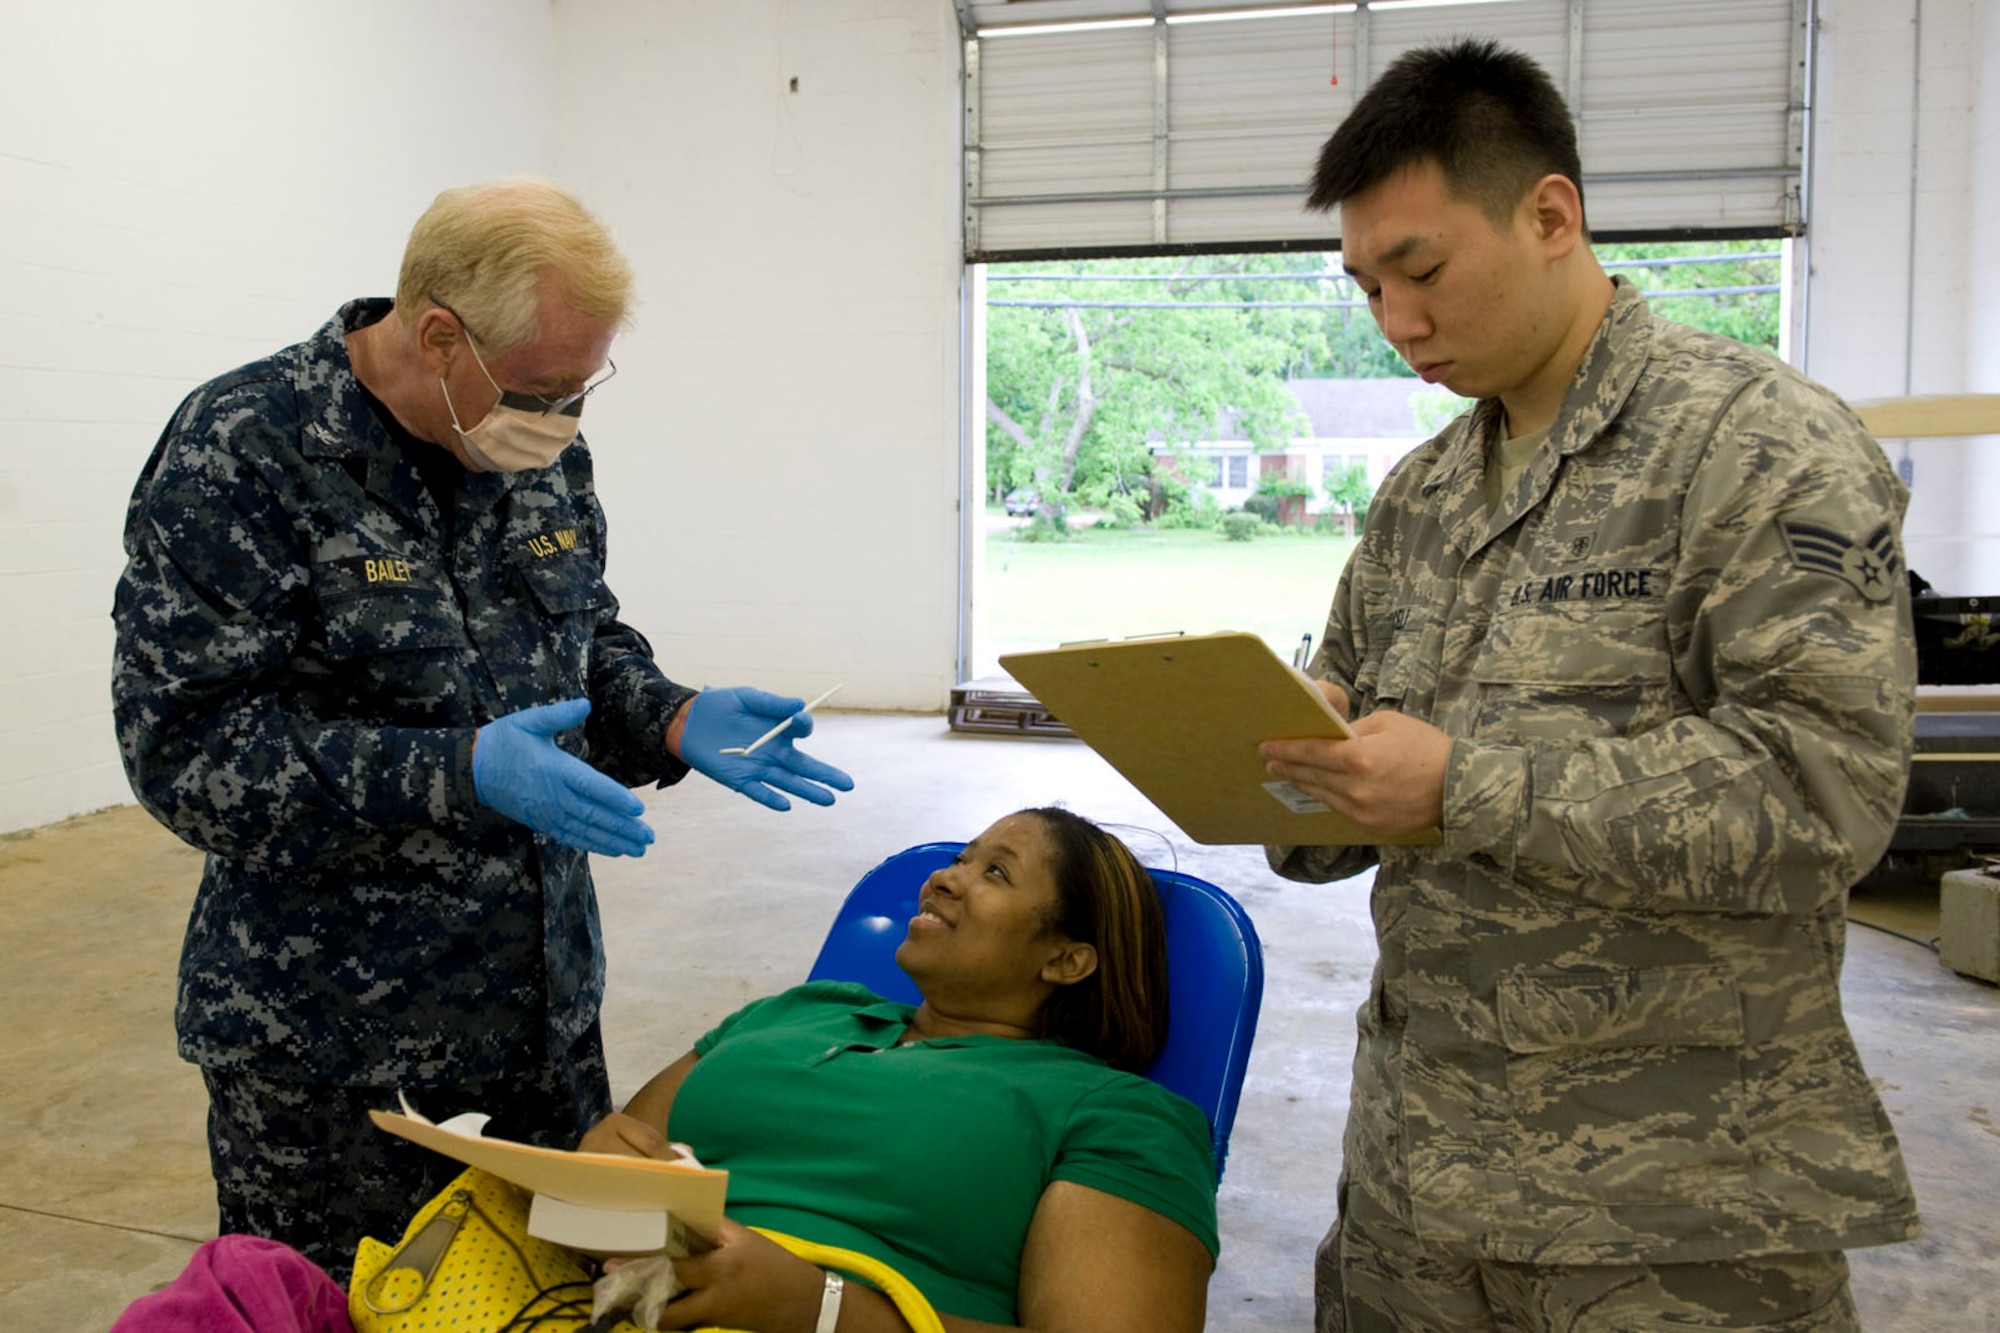 HAYNEVILLE, Ala. - Navy Capt. Stephen Bailey, a dentist, from OHSU, Portsmouth, VA. speaks with a patient on dental care while Senior Airman Daniel Micelli, a dental technician, from the 176th Medical Group, Alaska Air National Guard, takes notes, May 5, 2011.  Bailey and Micelli are in Alabama along with about sixty other medical professional from numerous military components and services for an Innovative Readiness Training (IRT) mission. The IRT program allows for real world training opportunities for military personnel while providing needed services to under-served communities in the United States. Alaska Air National Guard photo by Master Sgt. Shannon Oleson.